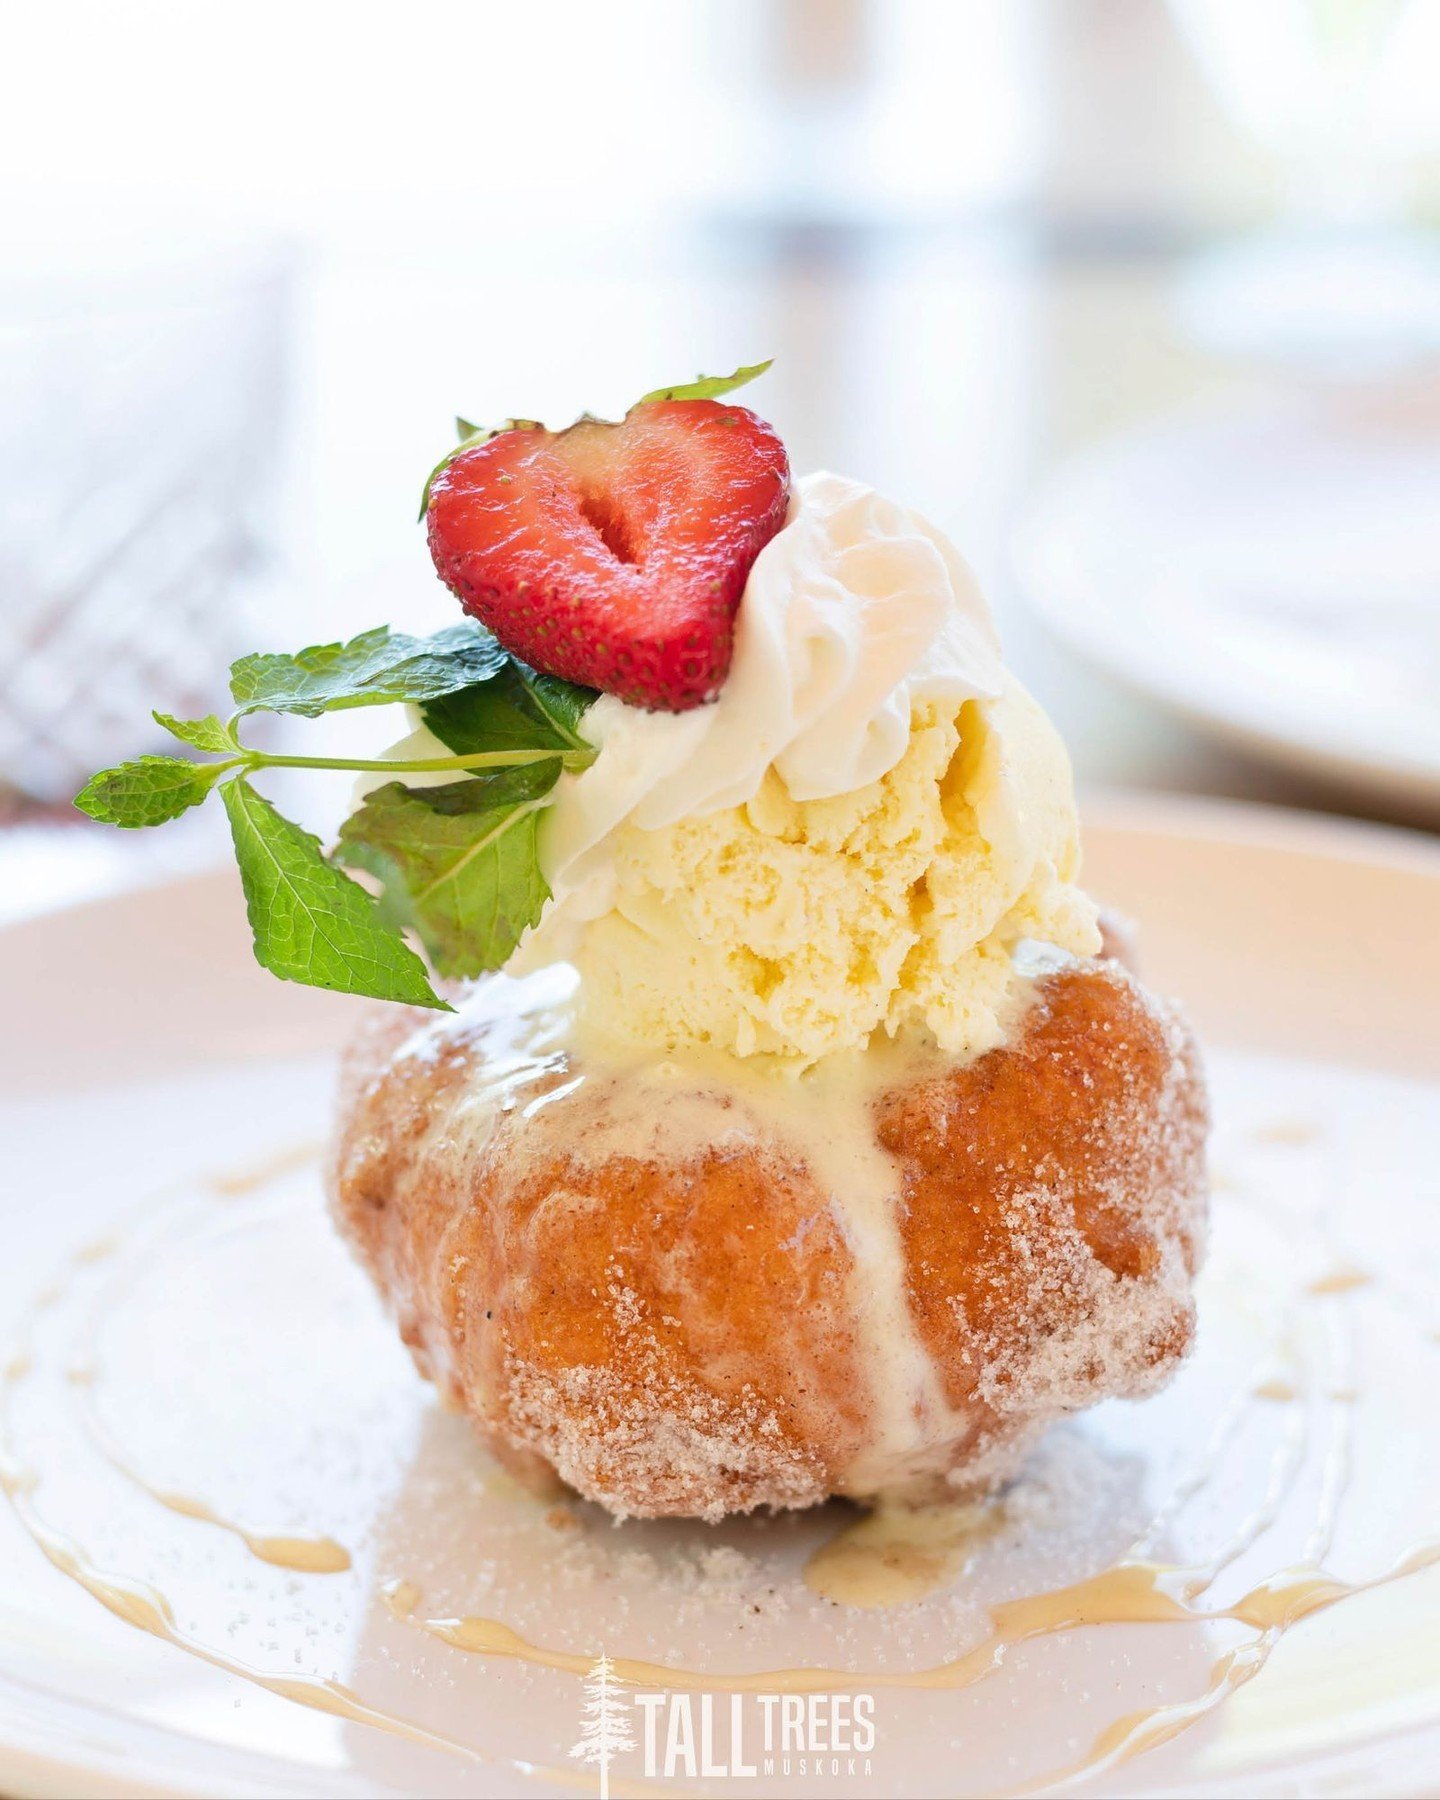 Savour the decadent delight of our Tall Trees Famous Deep Fried Butter Tart, a gourmet twist on a classic favourite. Tossed in cinnamon sugar and topped with vanilla bean ice cream and local maple syrup, it&rsquo;s like a donut ate a butter tart!

Re